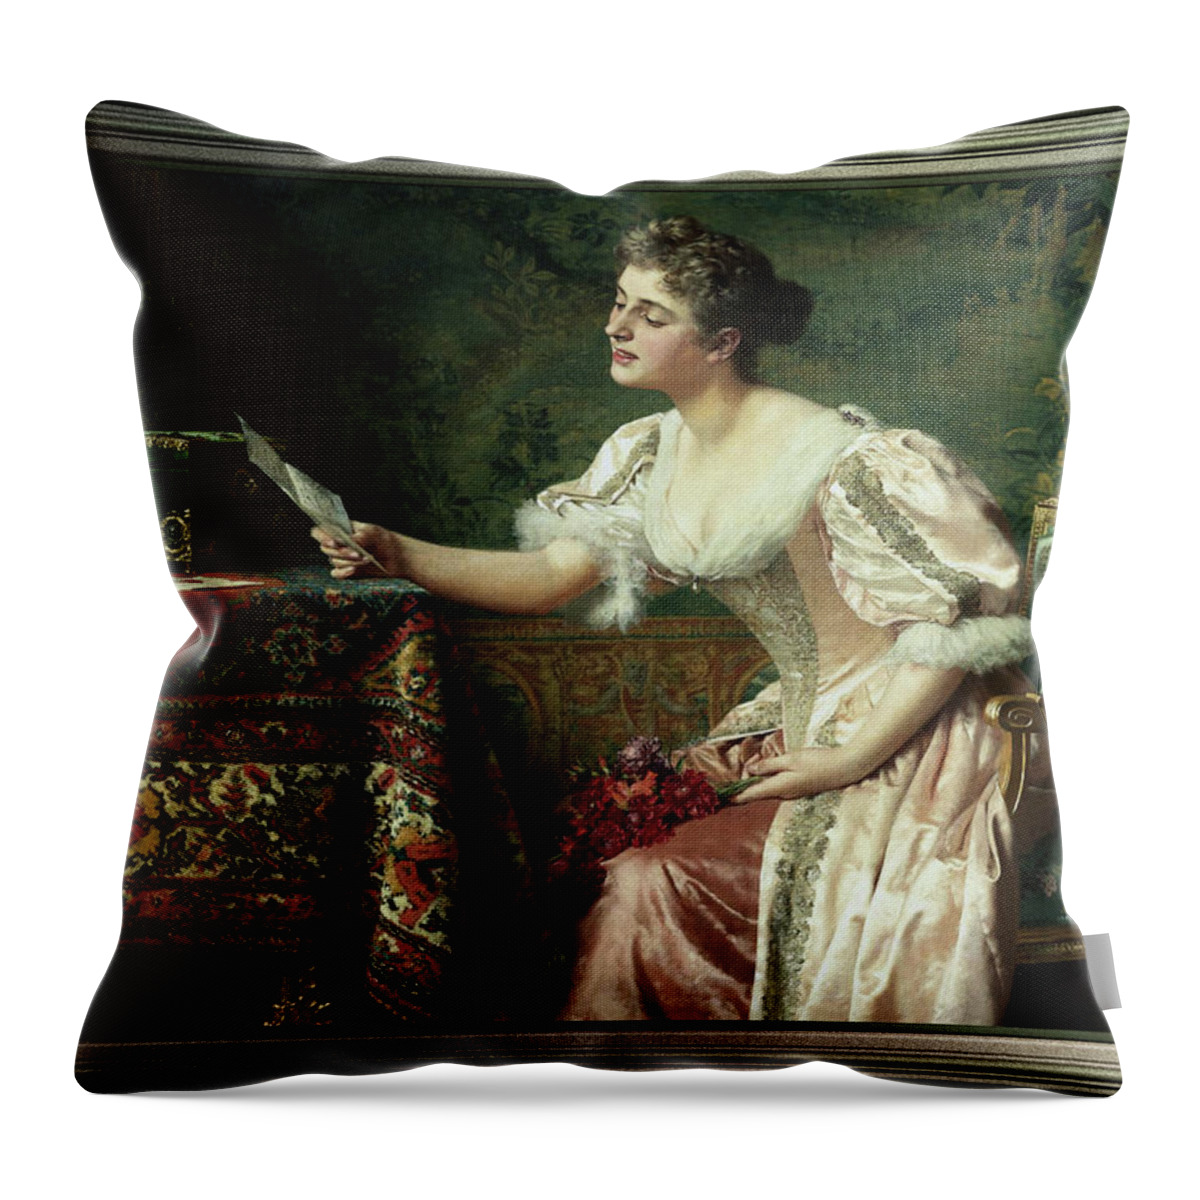 The Letter Throw Pillow featuring the painting The Letter by Wladyslaw Czachorski by Rolando Burbon